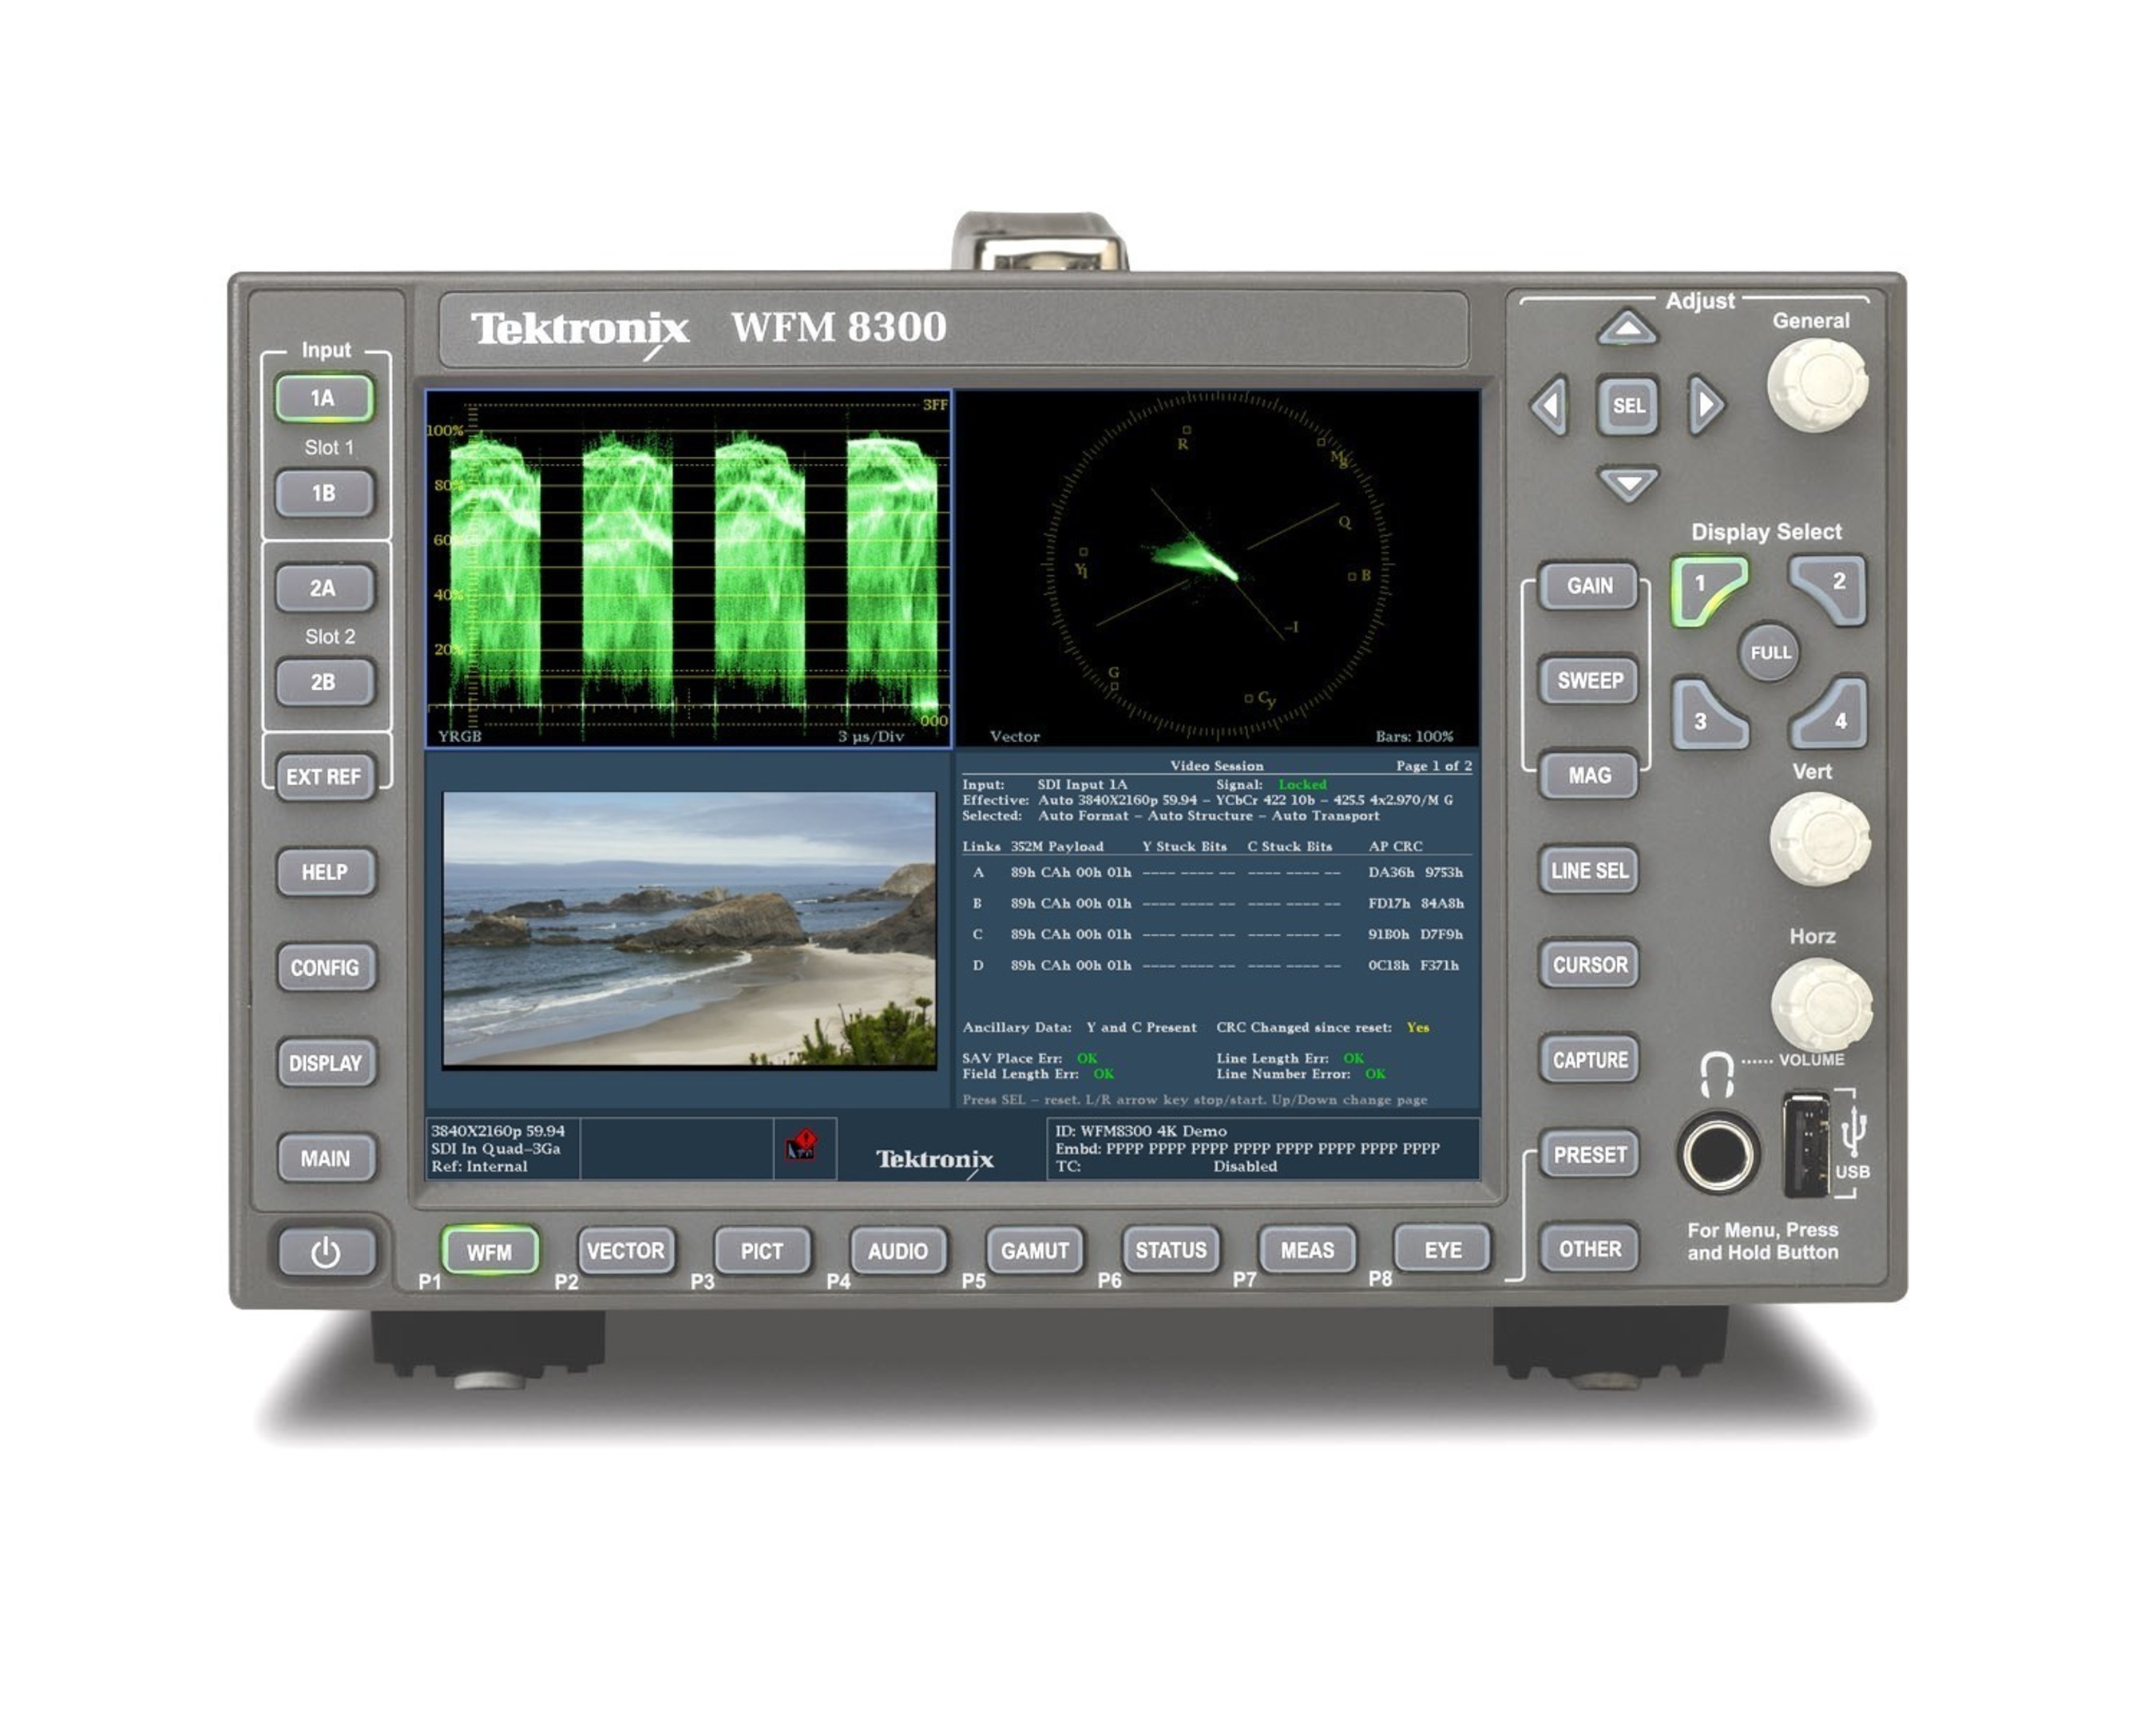 The WFM8200 and WFM8300 waveform monitors and WVR8200 and WVR8300 rasterizers can perform a broad range of 4K measurements including four tile displays of waveform, picture, vector, gamut and eye diagram for YPbPr formats.  These comprehensive measurement capabilities enable users to reduce the time to isolate, diagnose and remedy system issues and design faults. (PRNewsFoto/Tektronix)